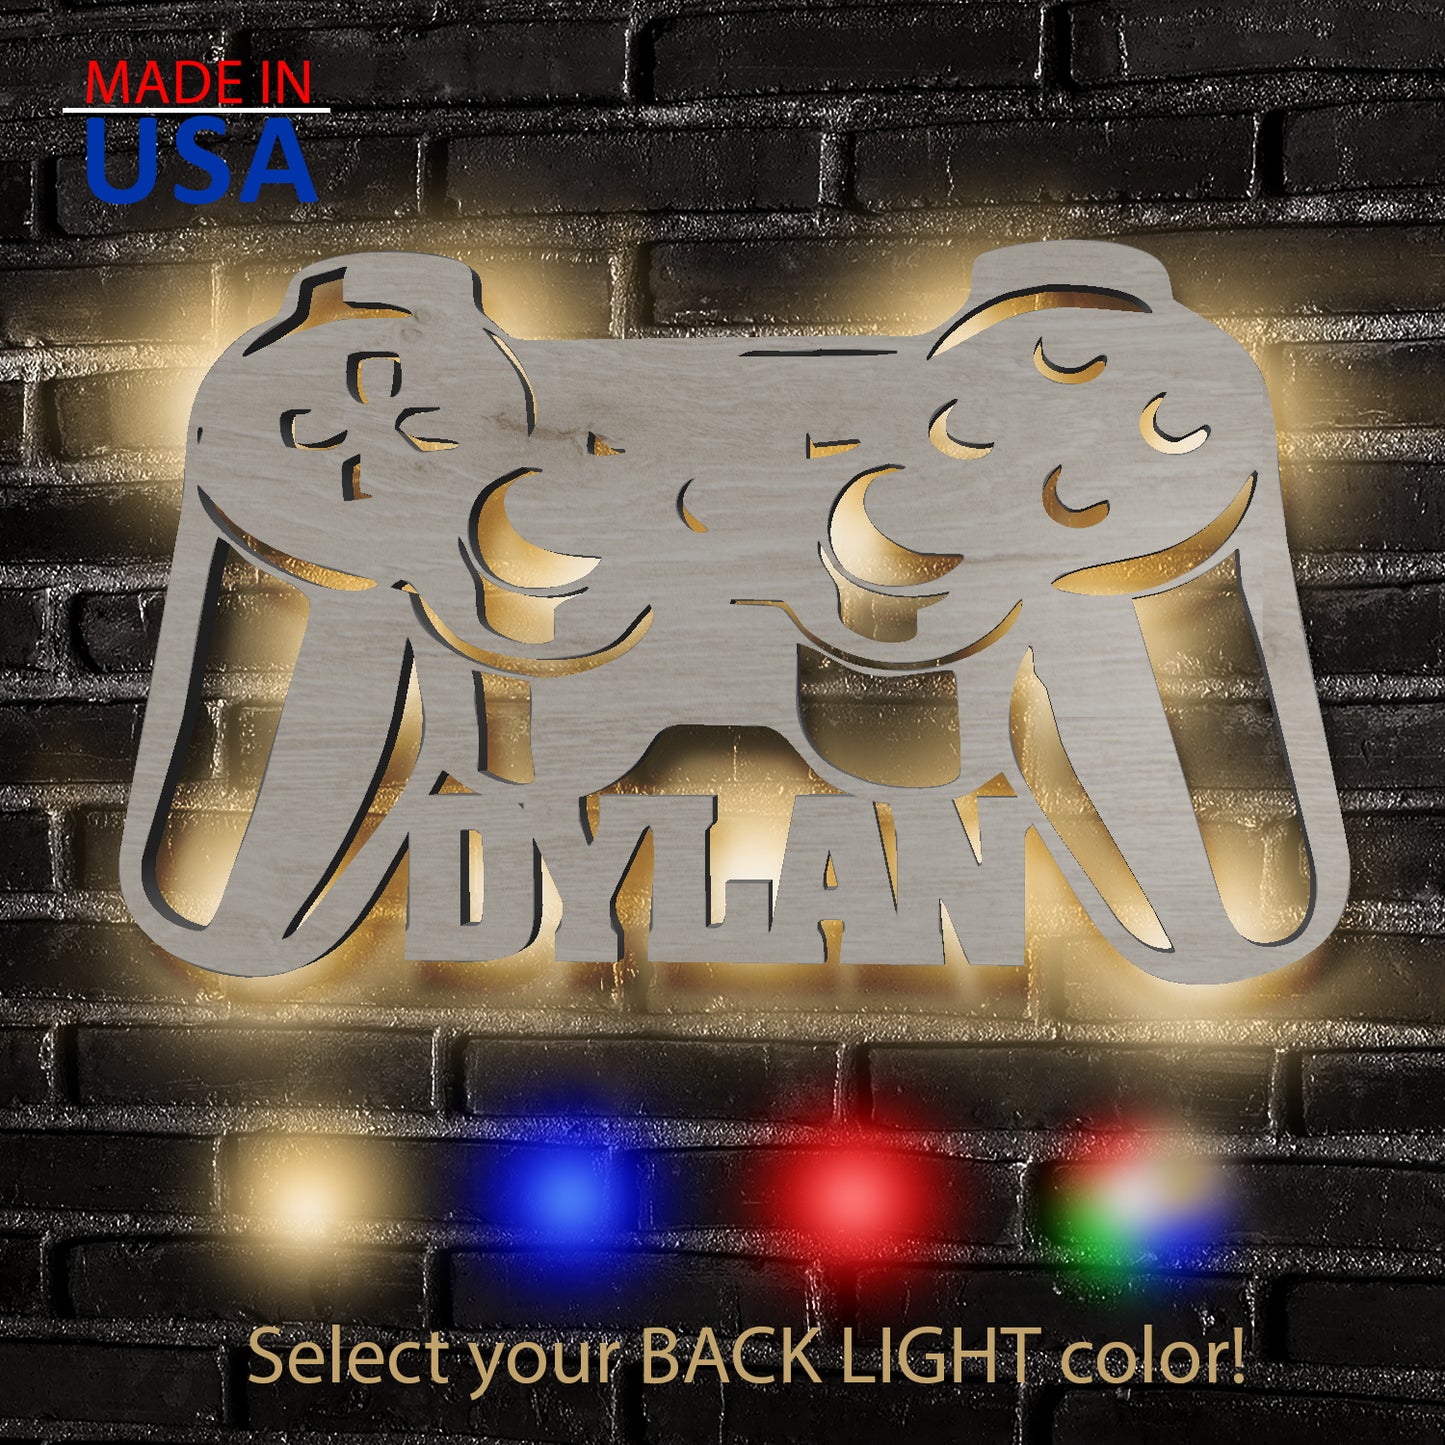 Game Controller - Personalized Wall Decor with remote LED Lights | Starting from: